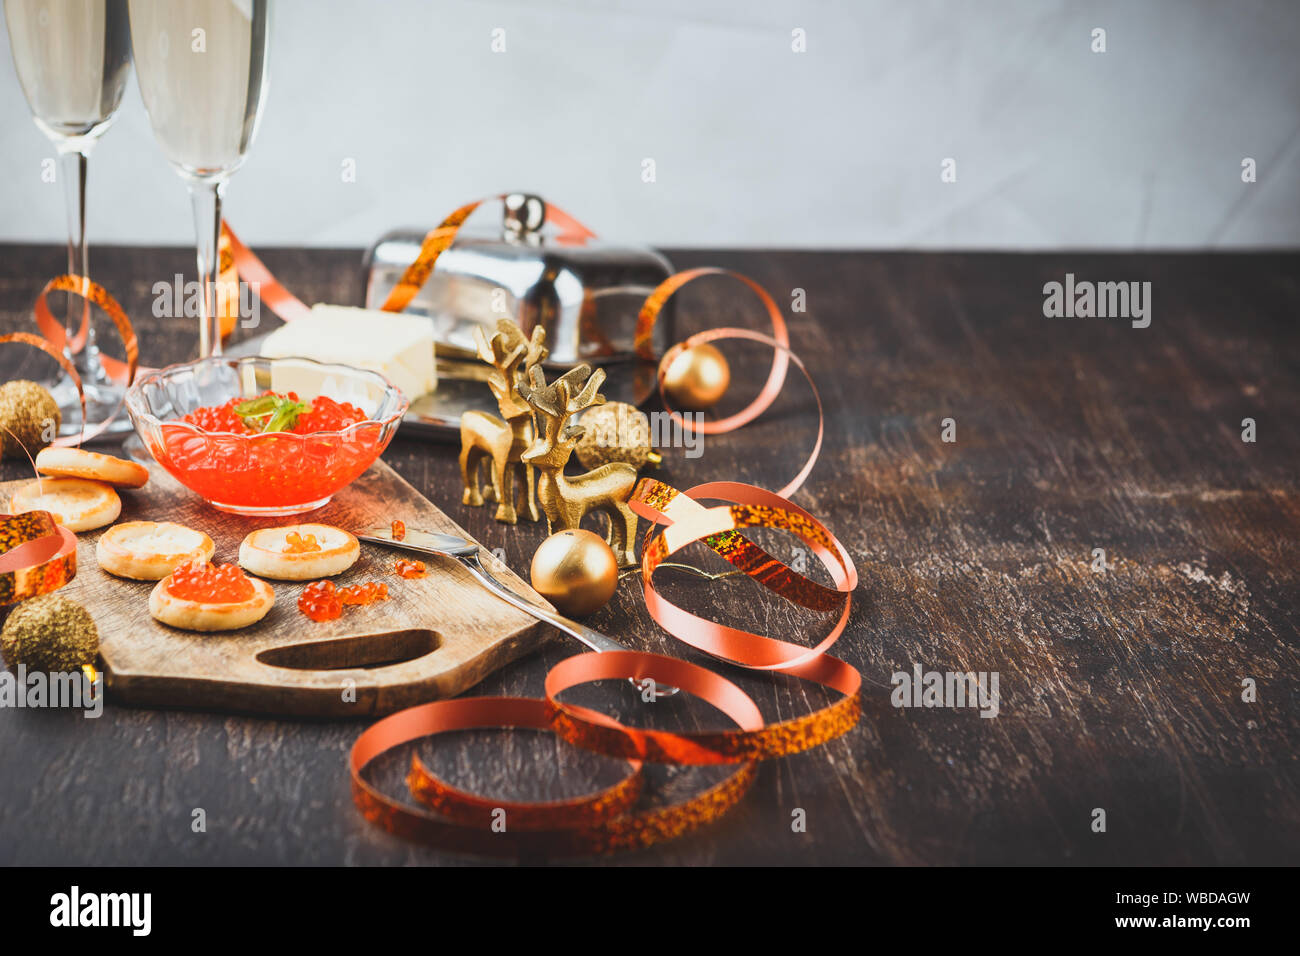 Tartlets with red caviar, champagne and butter on a festive table. Traditional Russian Christmas or New Year's holiday table. Space for text. Stock Photo